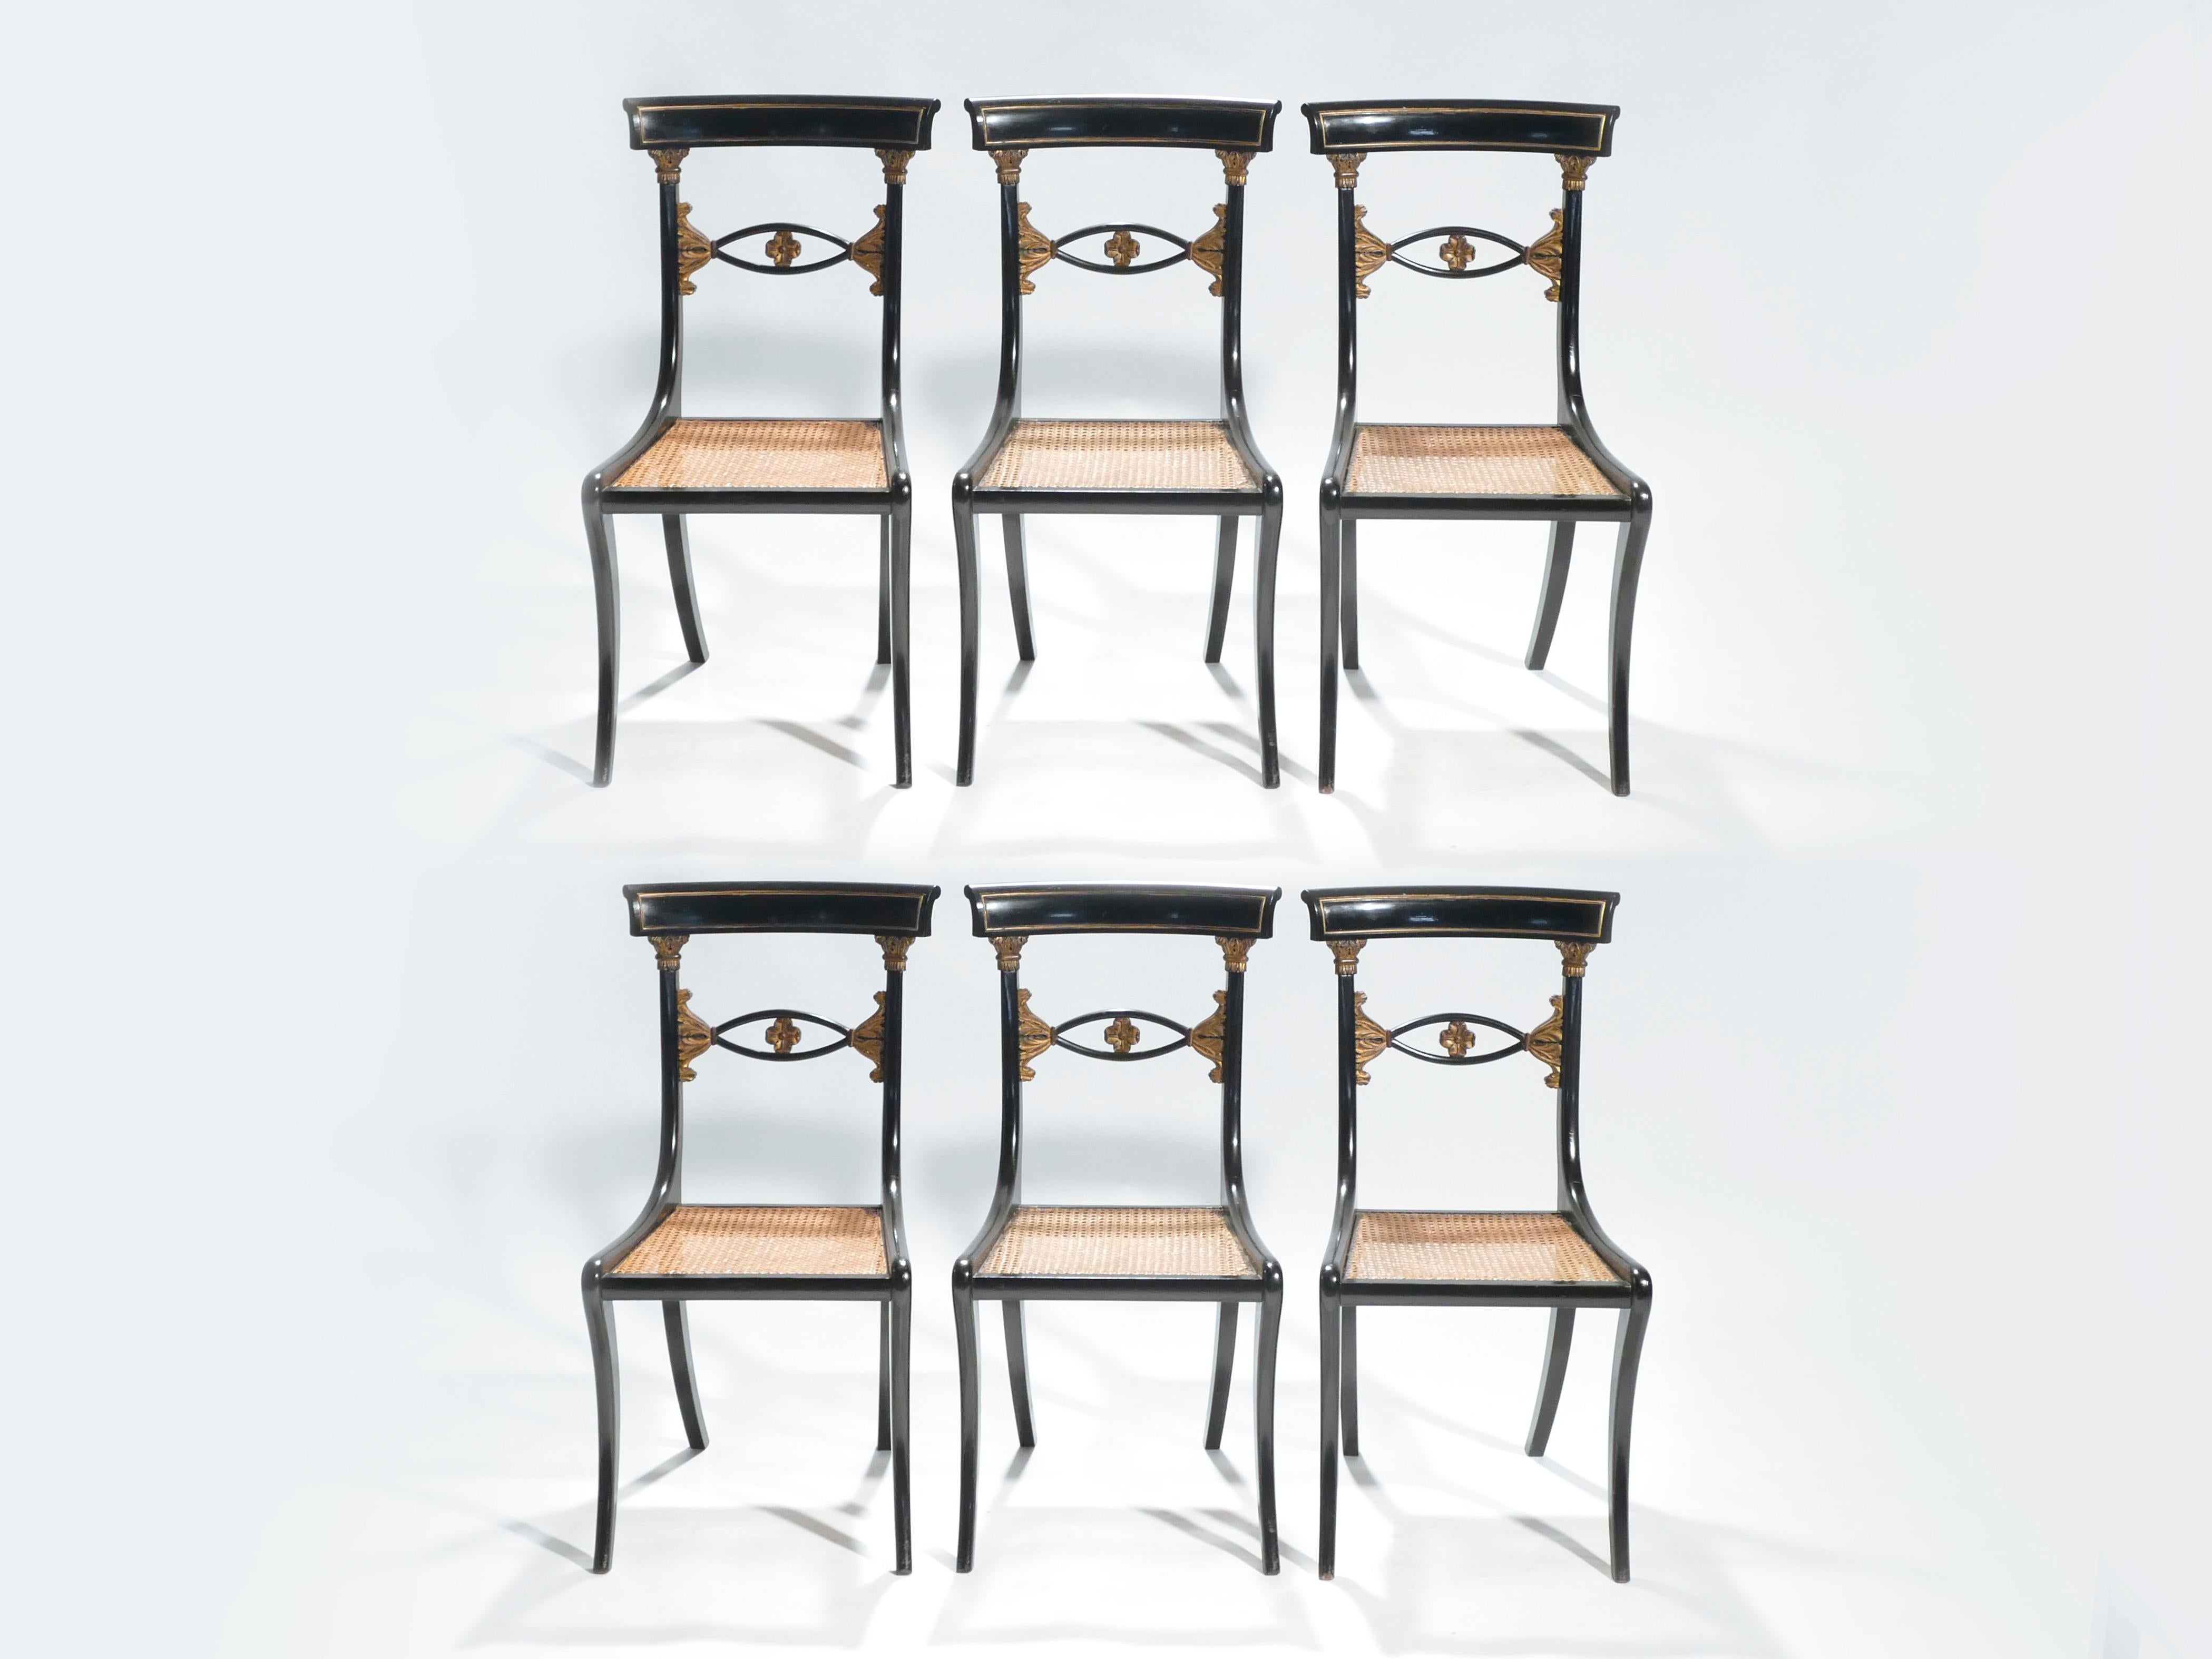 The Directoire style in furniture has its origins in France during the end of the 18th century. Sleek, stately lines, like seen in this set of chairs, were the marks of the style.
This set of sturdy painted wood chairs was actually designed in the